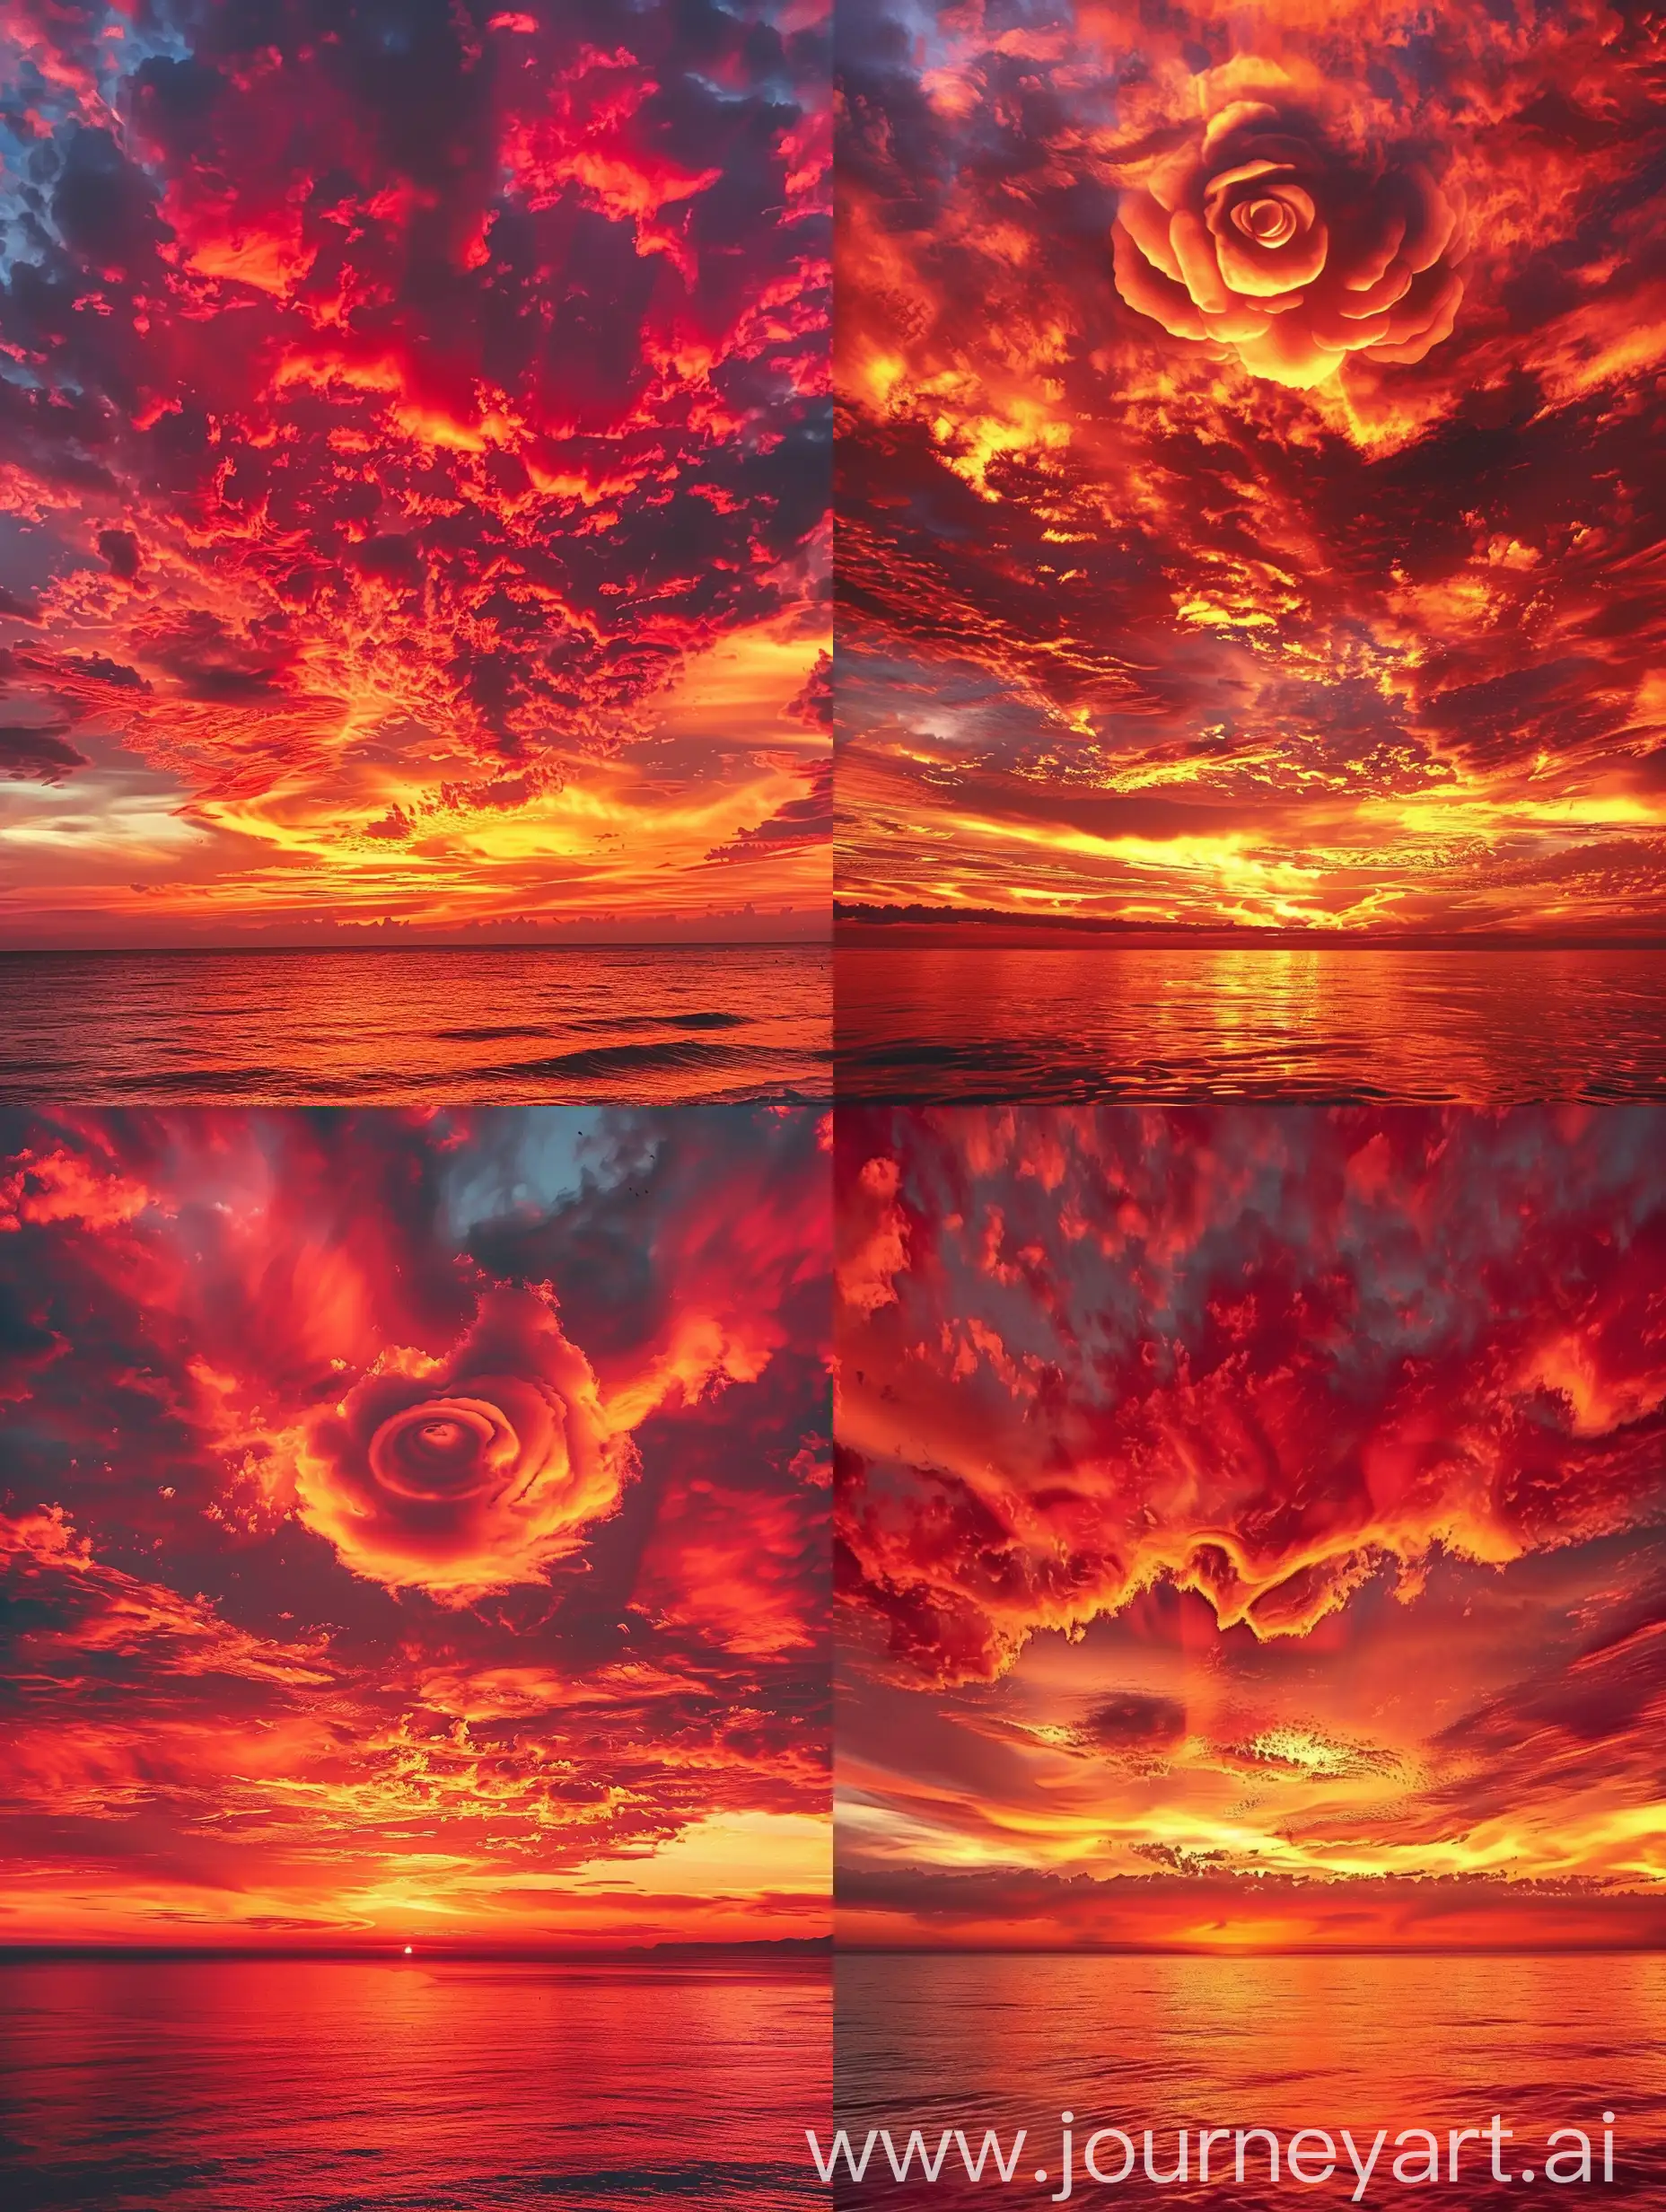 Dramatic-Sunset-Sky-with-RoseShaped-Clouds-over-Serene-Ocean